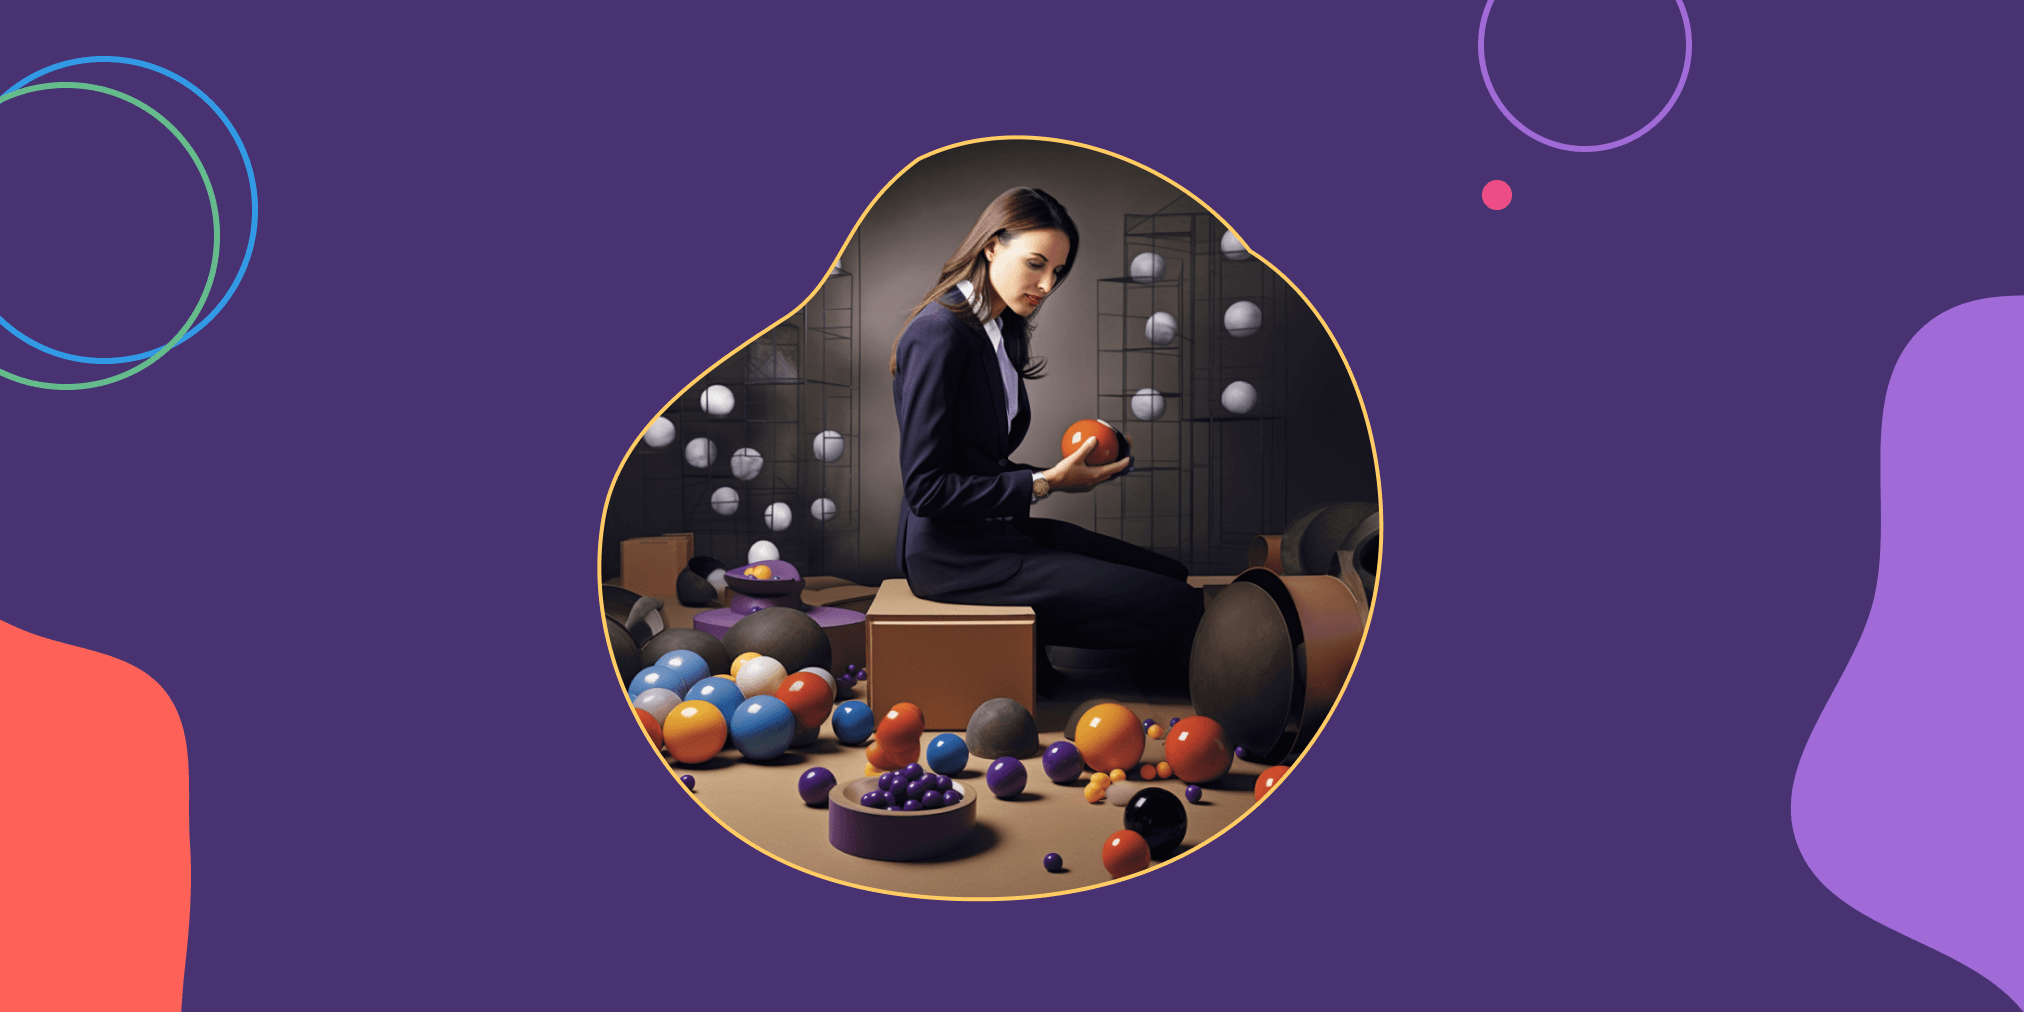 A Business Woman Sorting Spheres, a metaphor for using a framework to prioritize